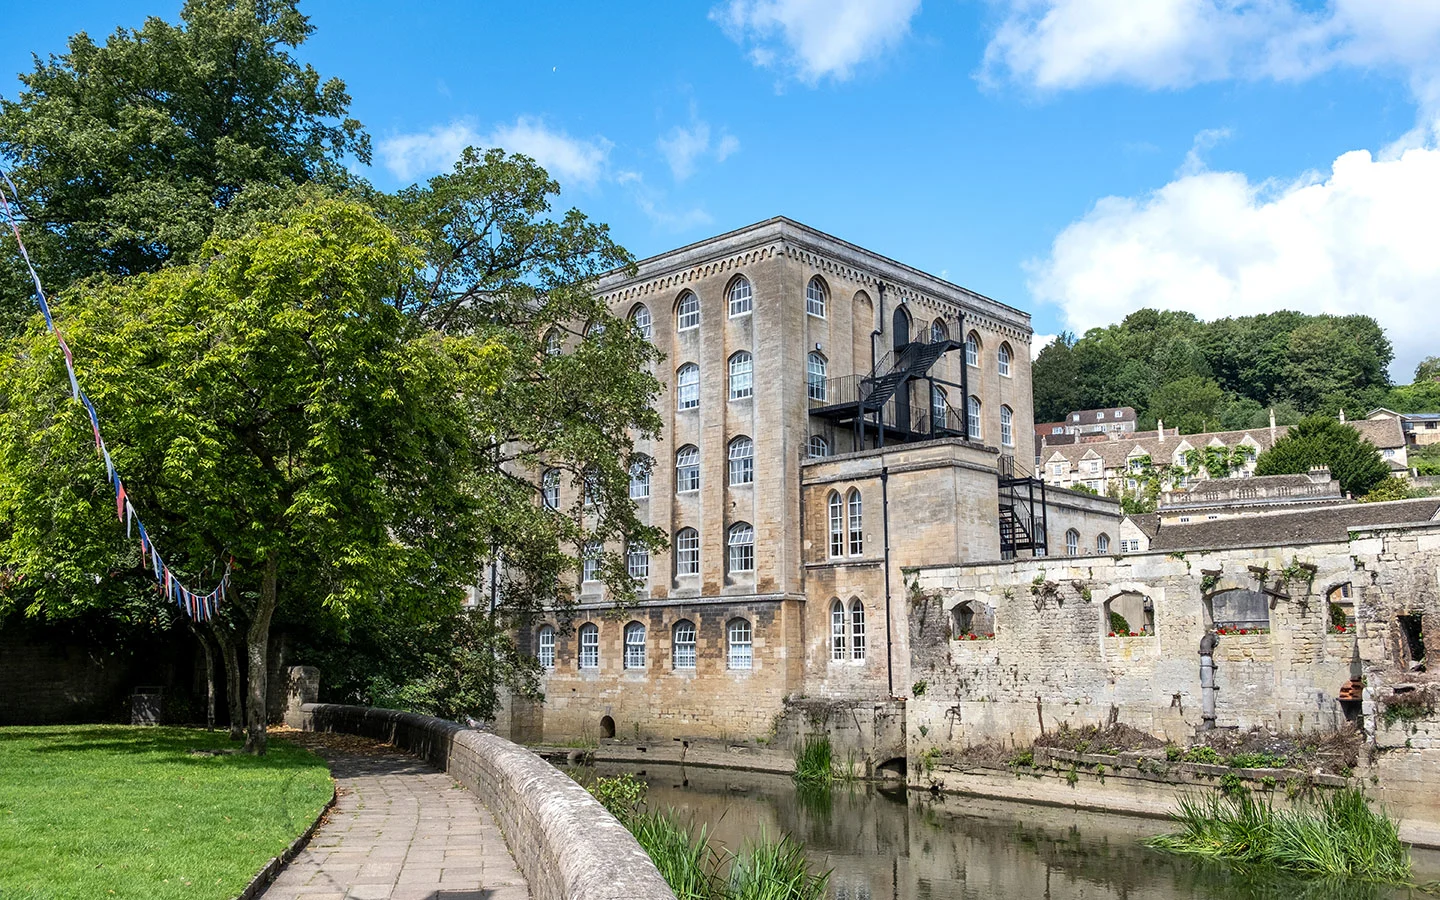 The former Abbey Mill by the River Avon in Bradford on Avon